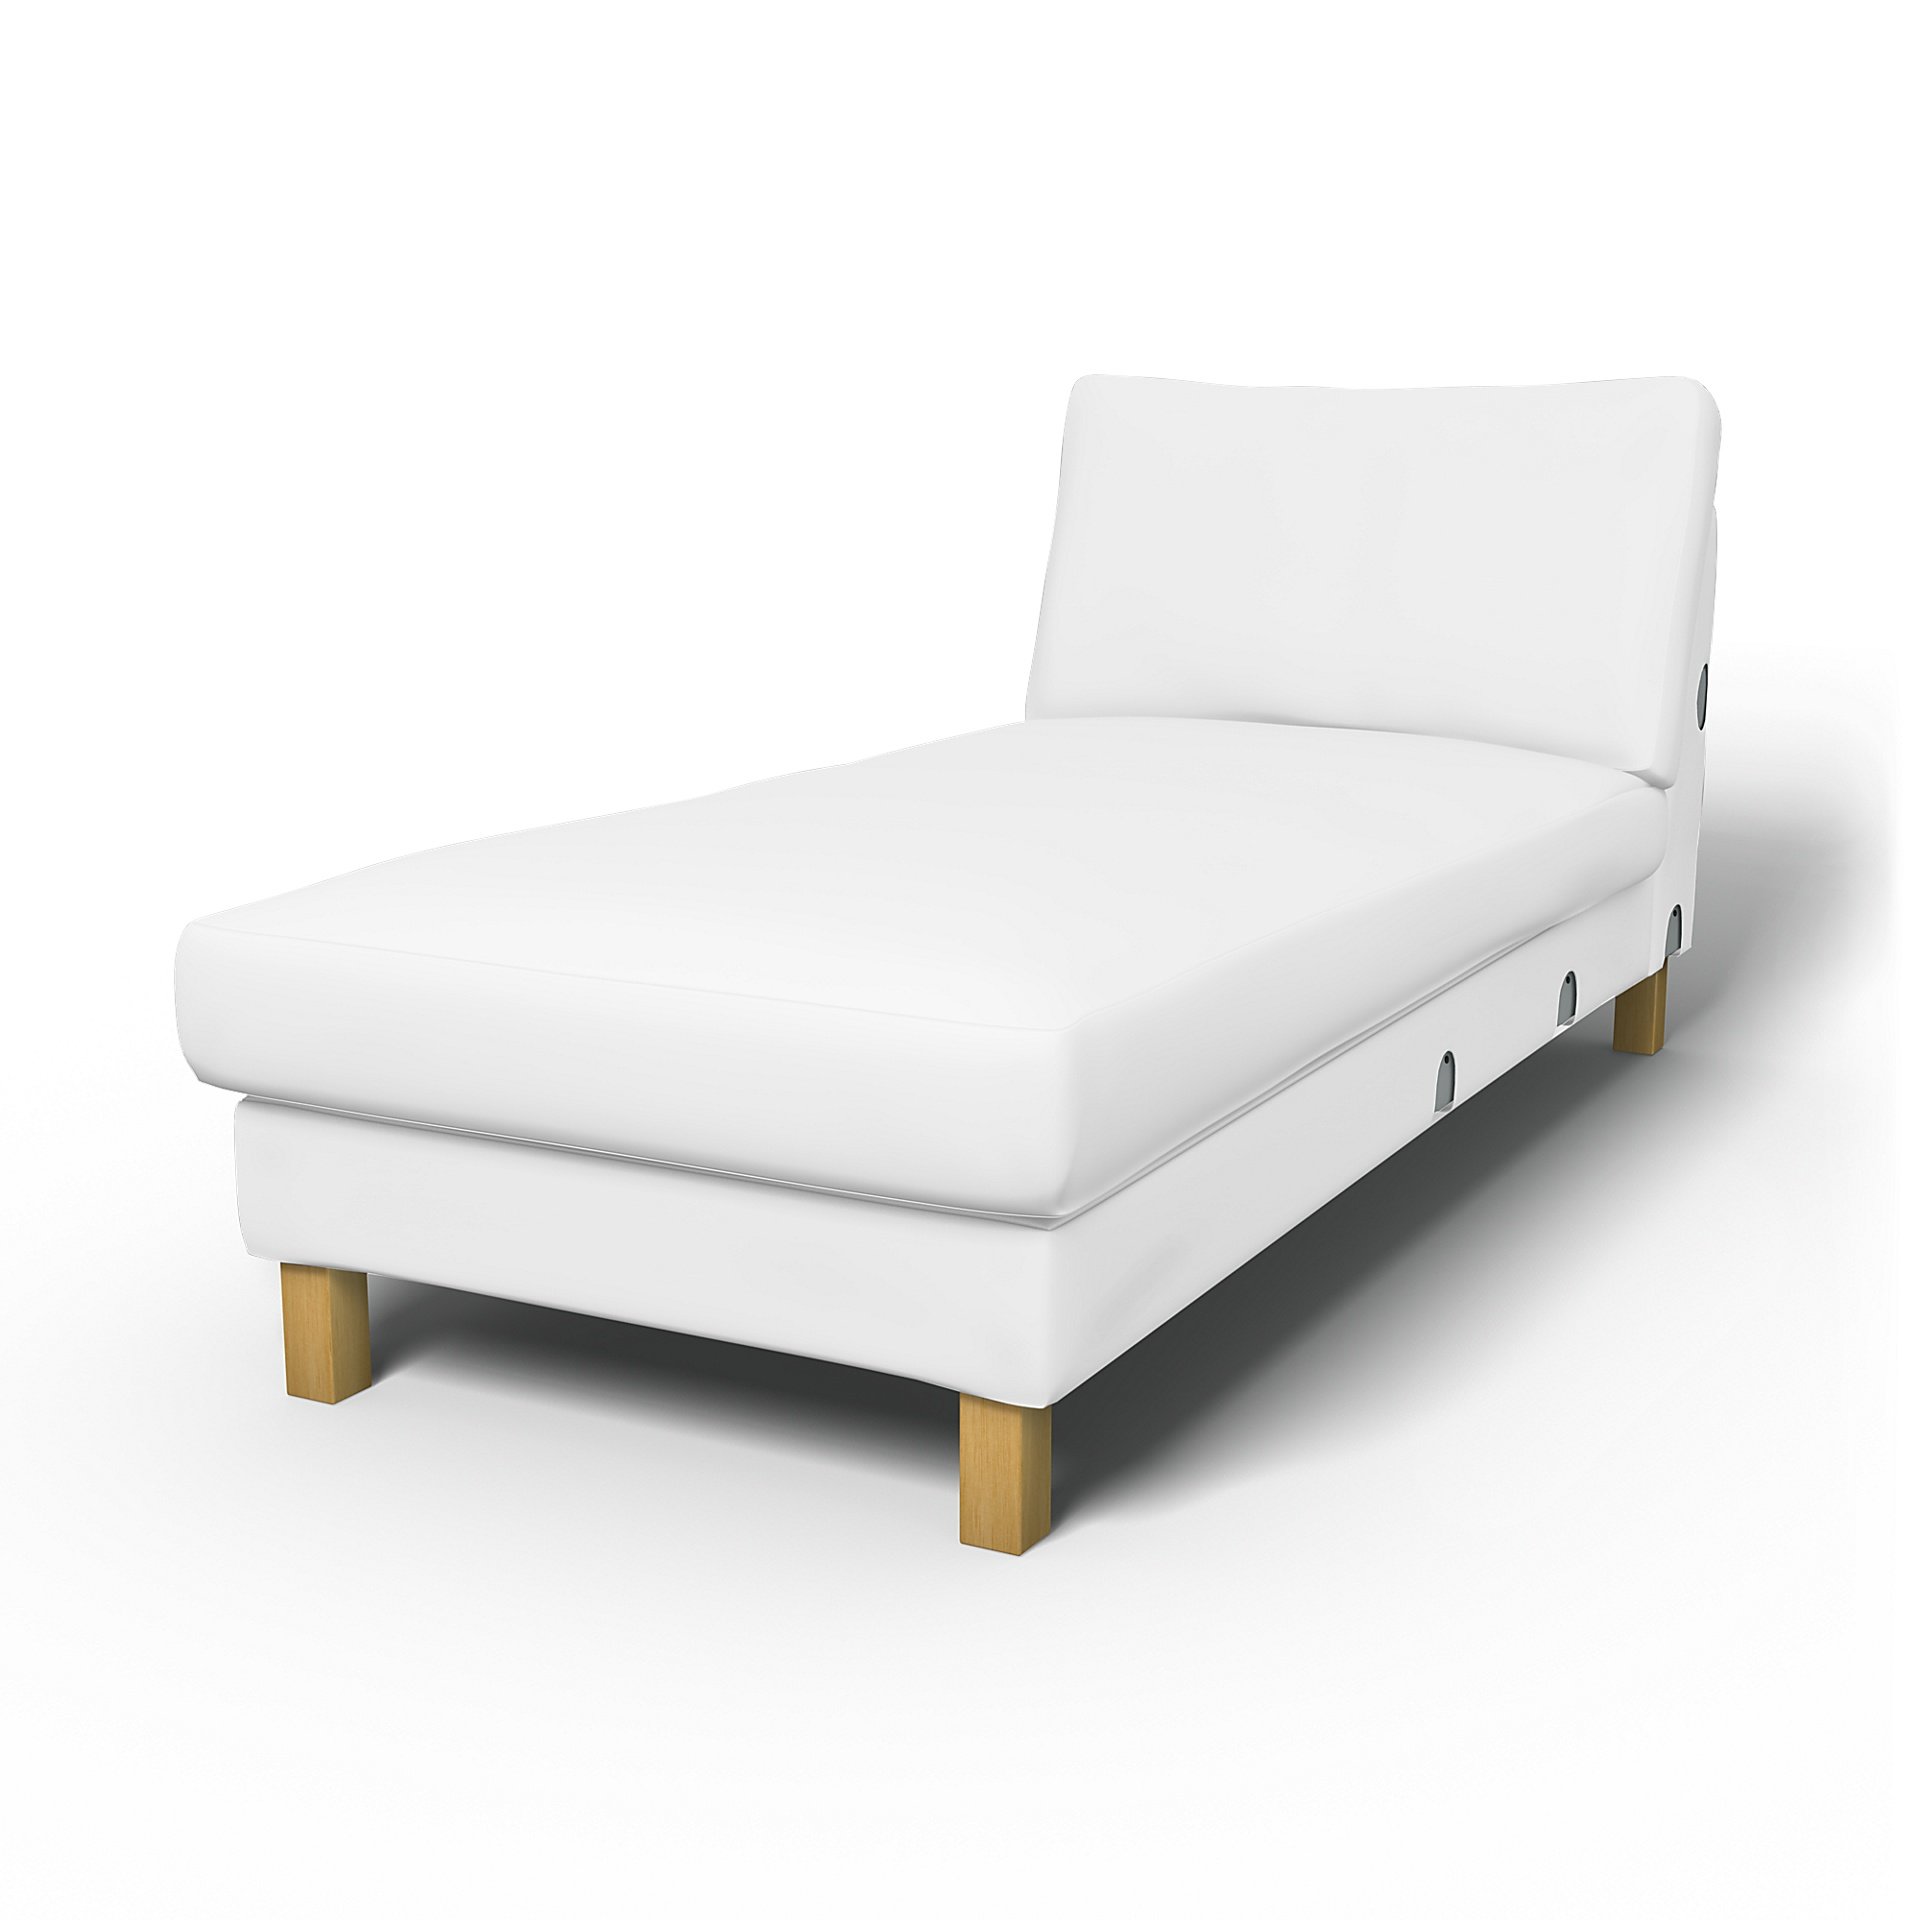 IKEA - Karlstad Chaise Longue Add-on Unit Cover, Absolute White, Linen - Bemz